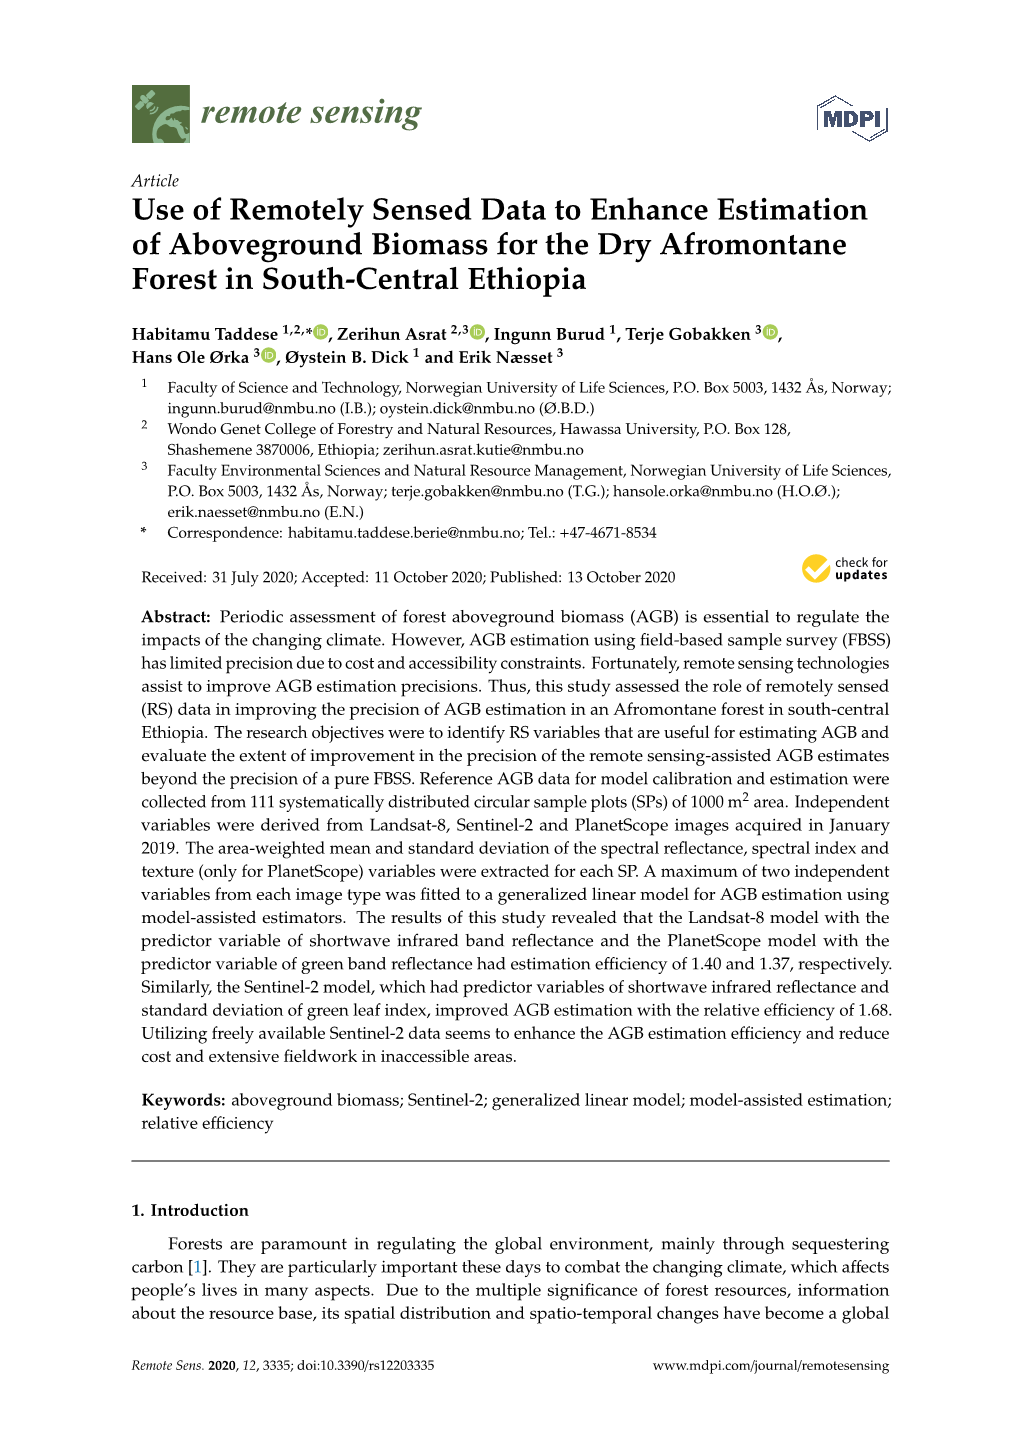 Use of Remotely Sensed Data to Enhance Estimation of Aboveground Biomass for the Dry Afromontane Forest in South-Central Ethiopia